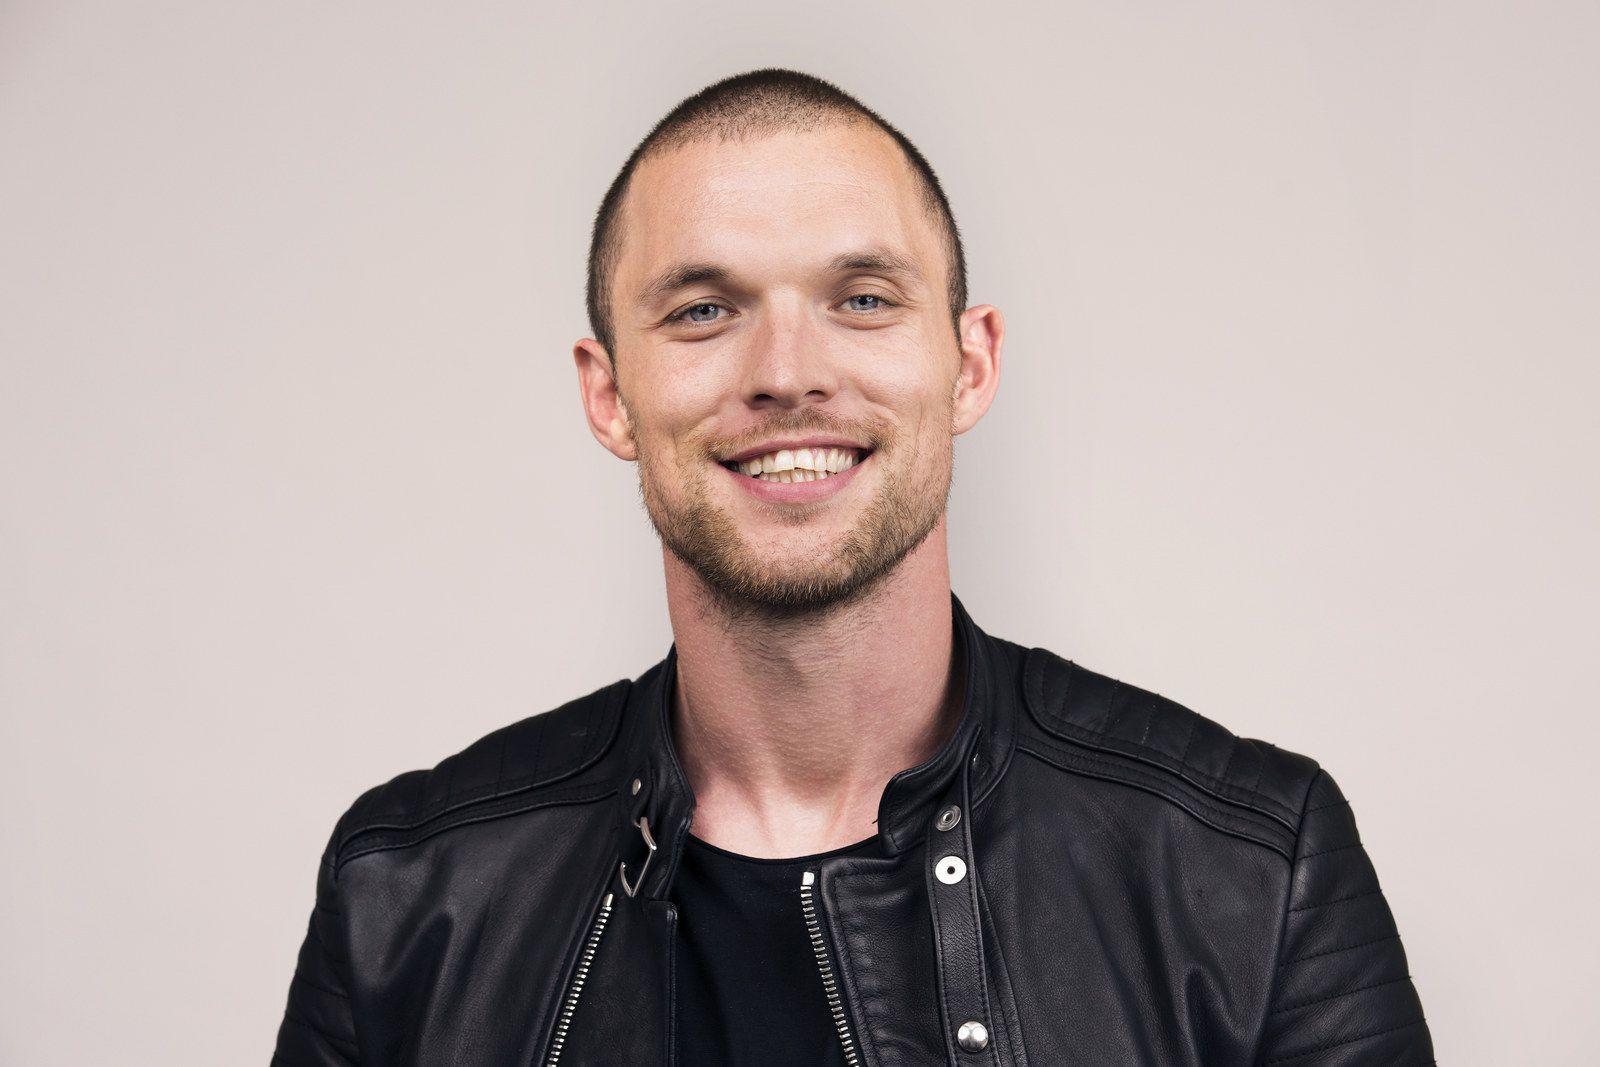 Ed Skrein Steps Down From HELLBOY Role Amidst Whitewashing Controvery